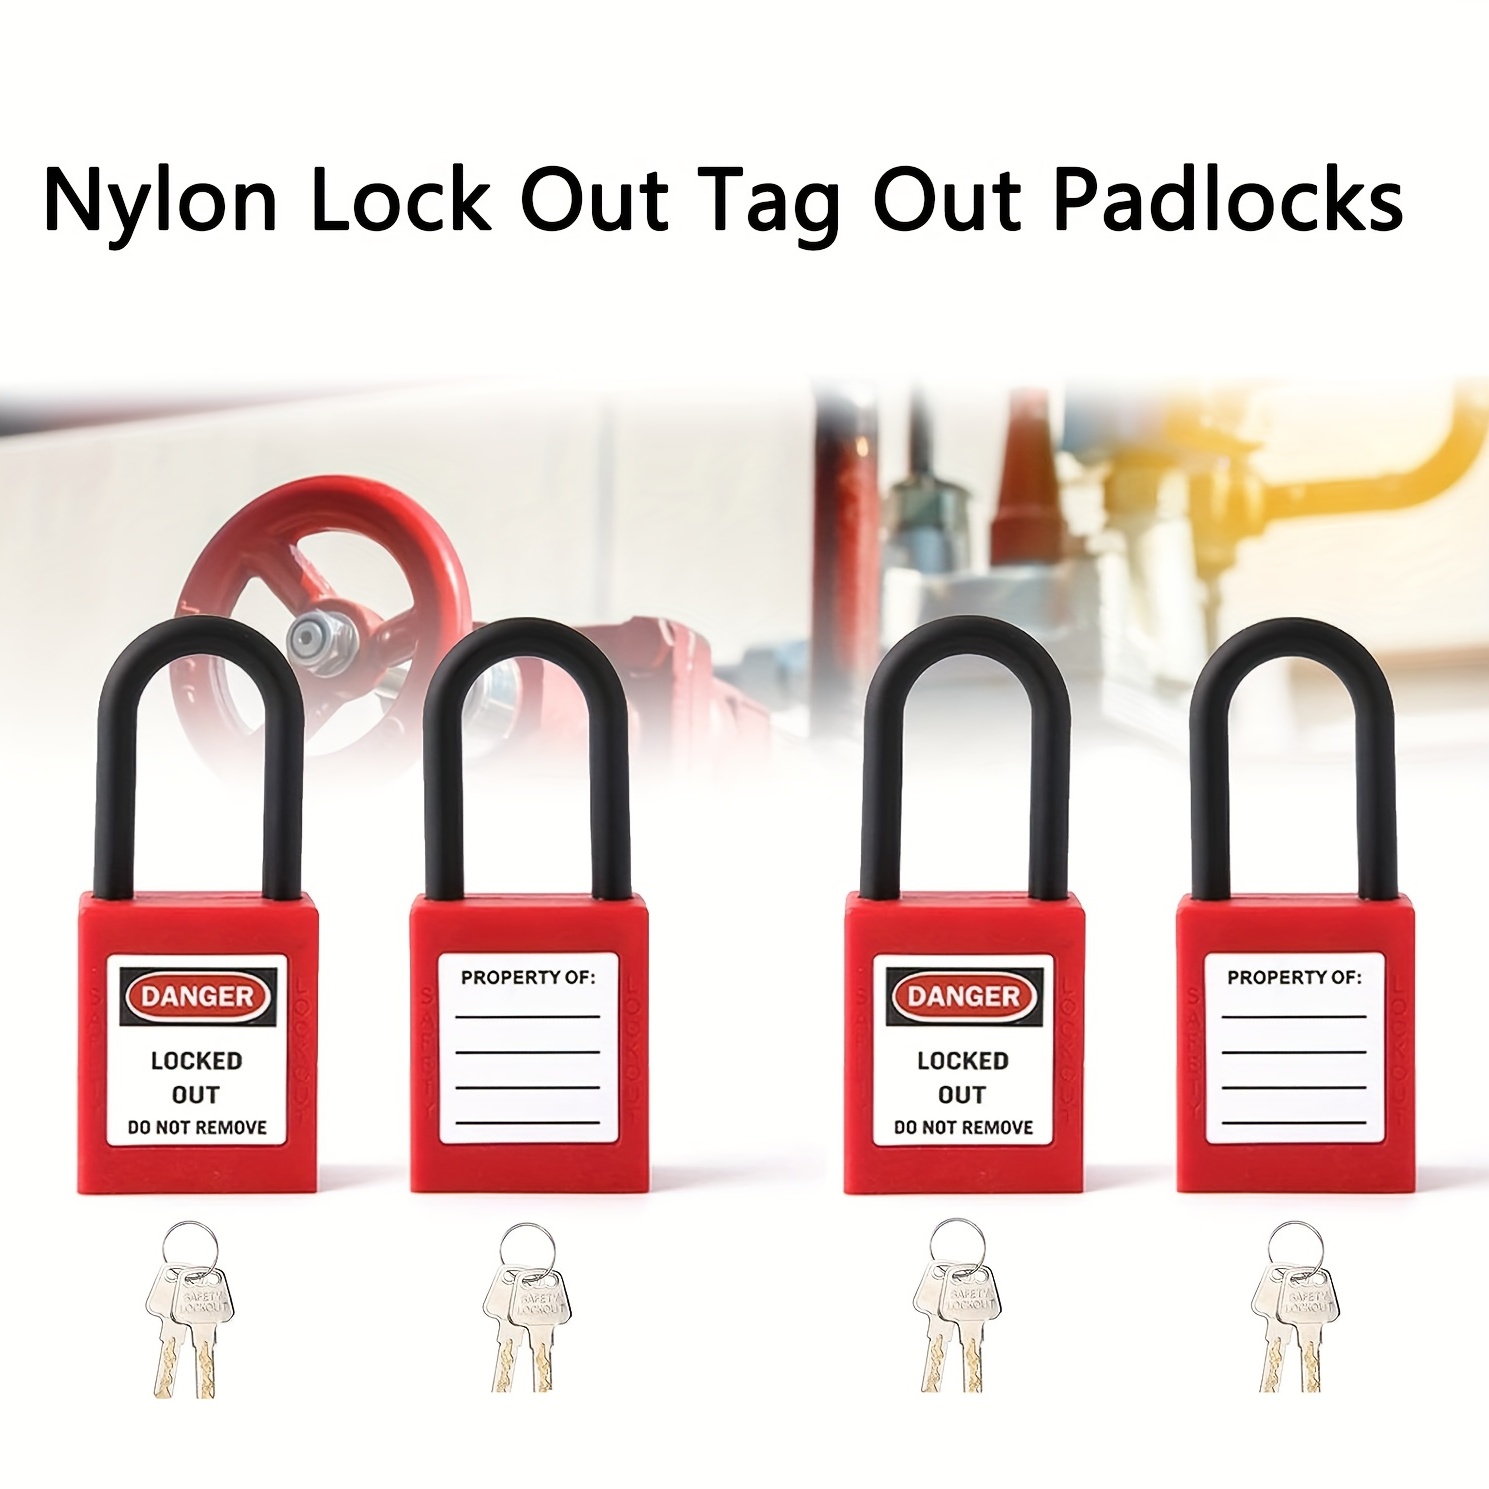 

38mm Lockout Tagout Locks Set, Nylon Lock Out Tag Out Padlocks Loto Safe Padlock Industrial Engineering Insulation Security Tool For Electrical Lockout Tag Out Stations And Devices